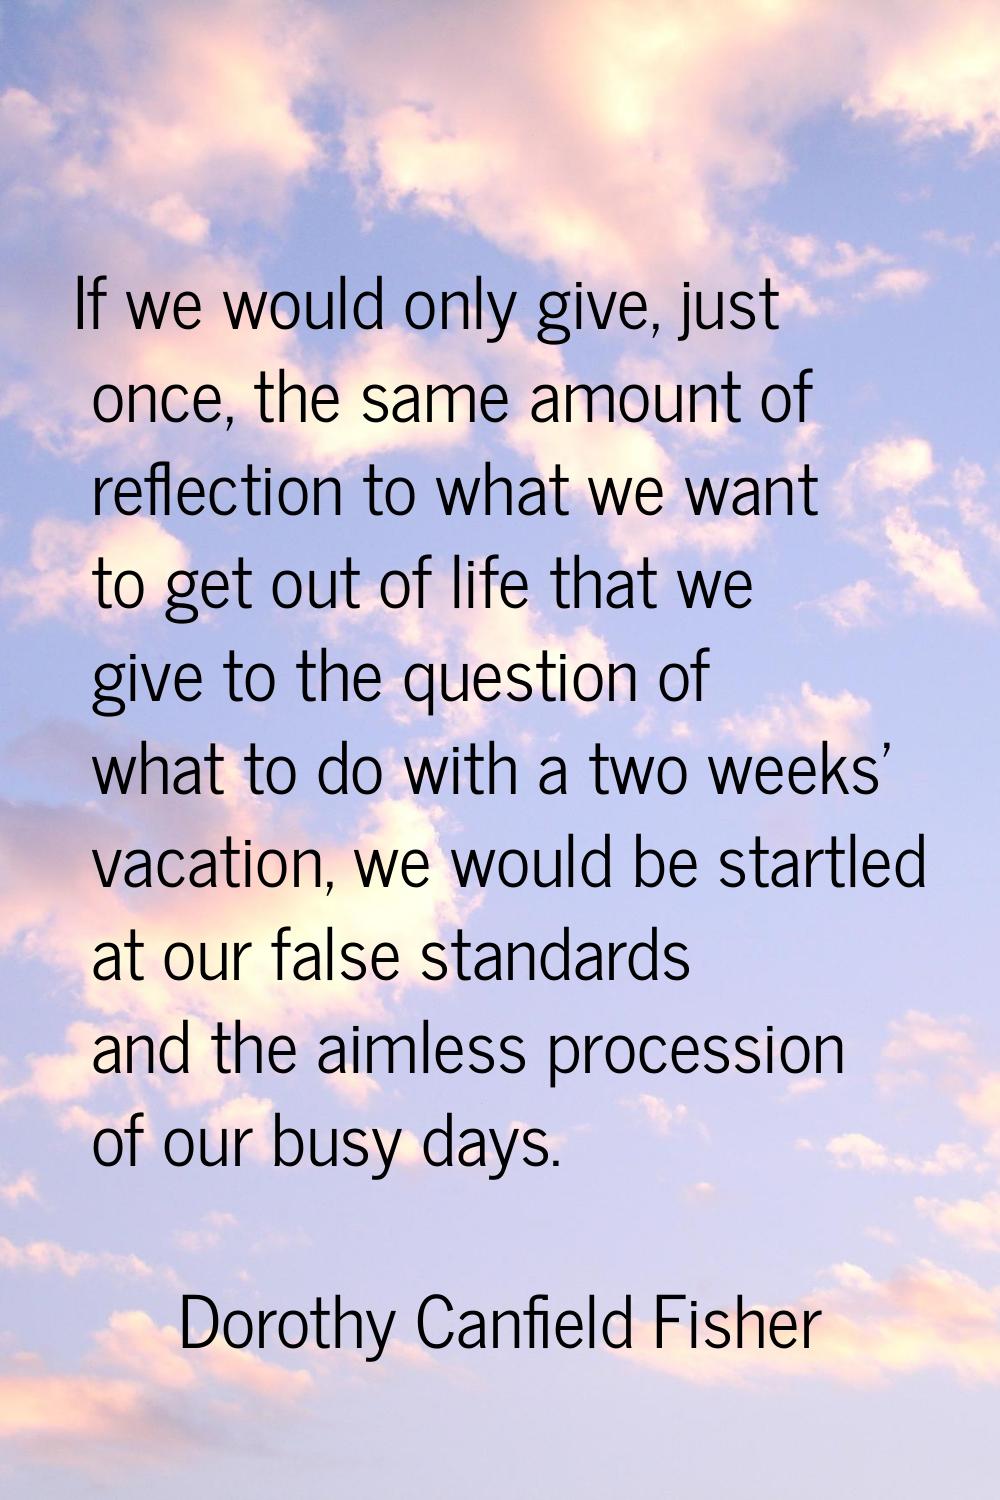 If we would only give, just once, the same amount of reflection to what we want to get out of life 